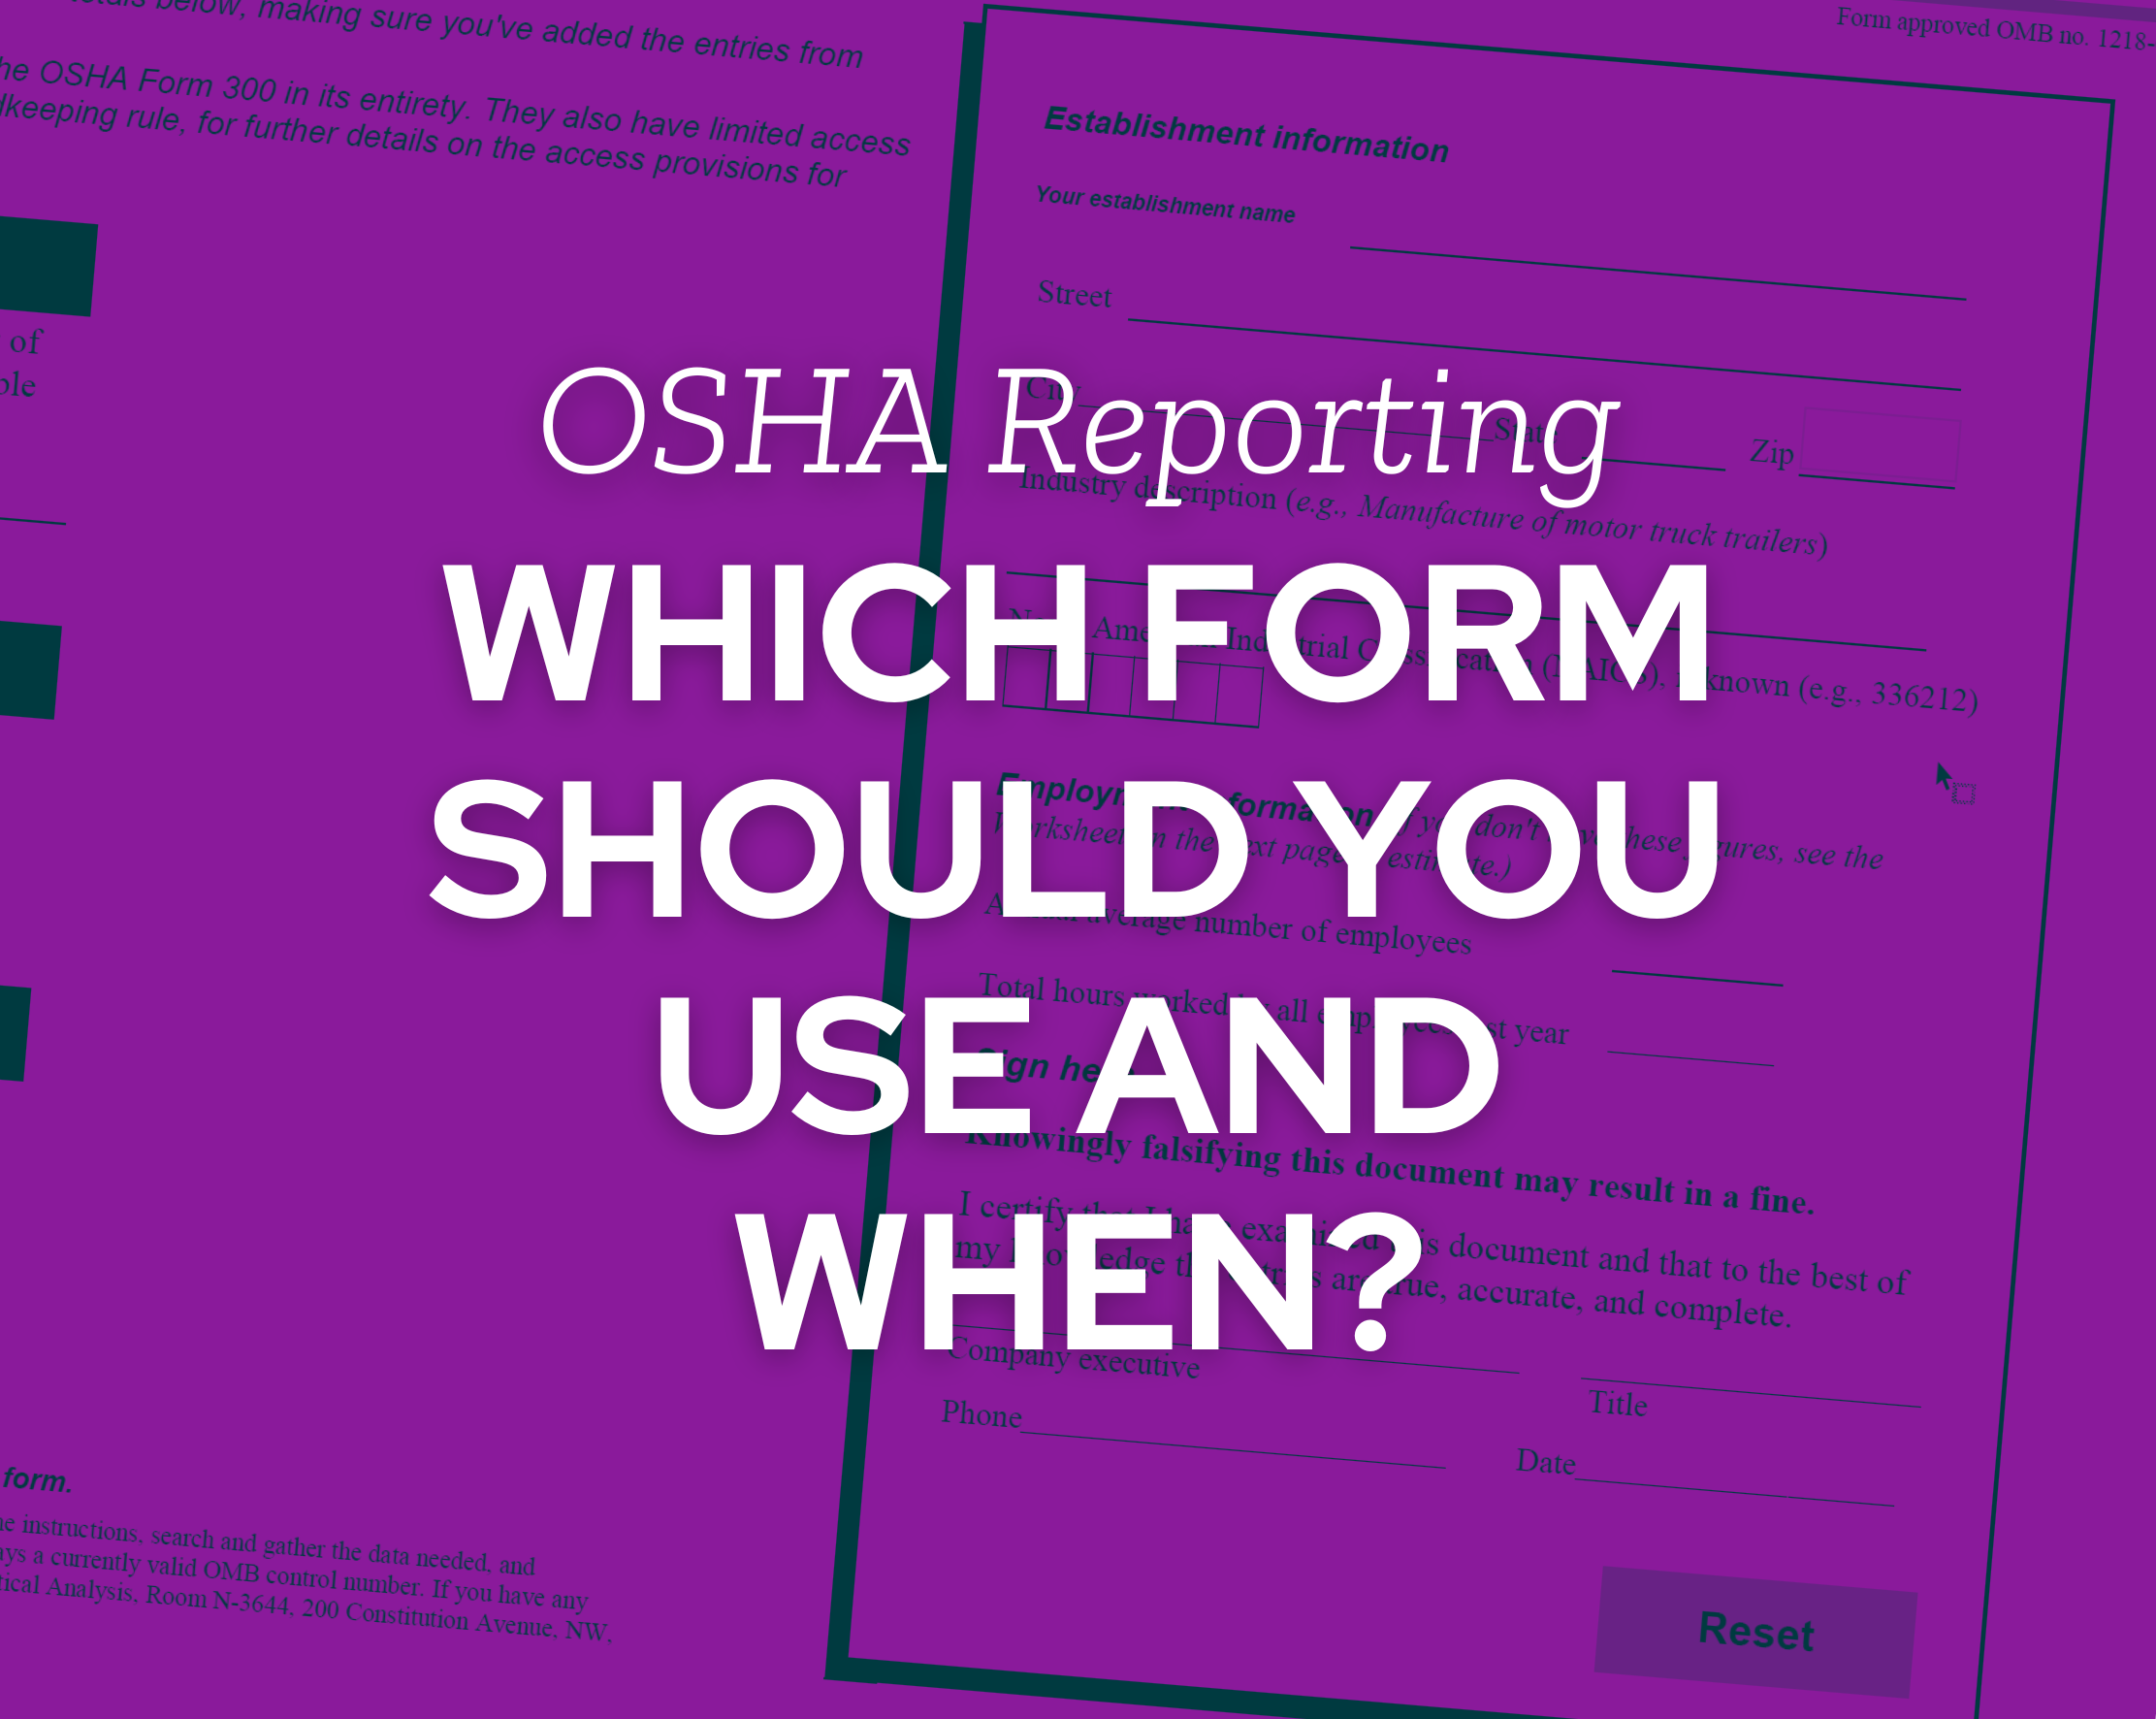 OSHA Reporting Forms: Which One Should You Use and When? Let’s Get it Straight